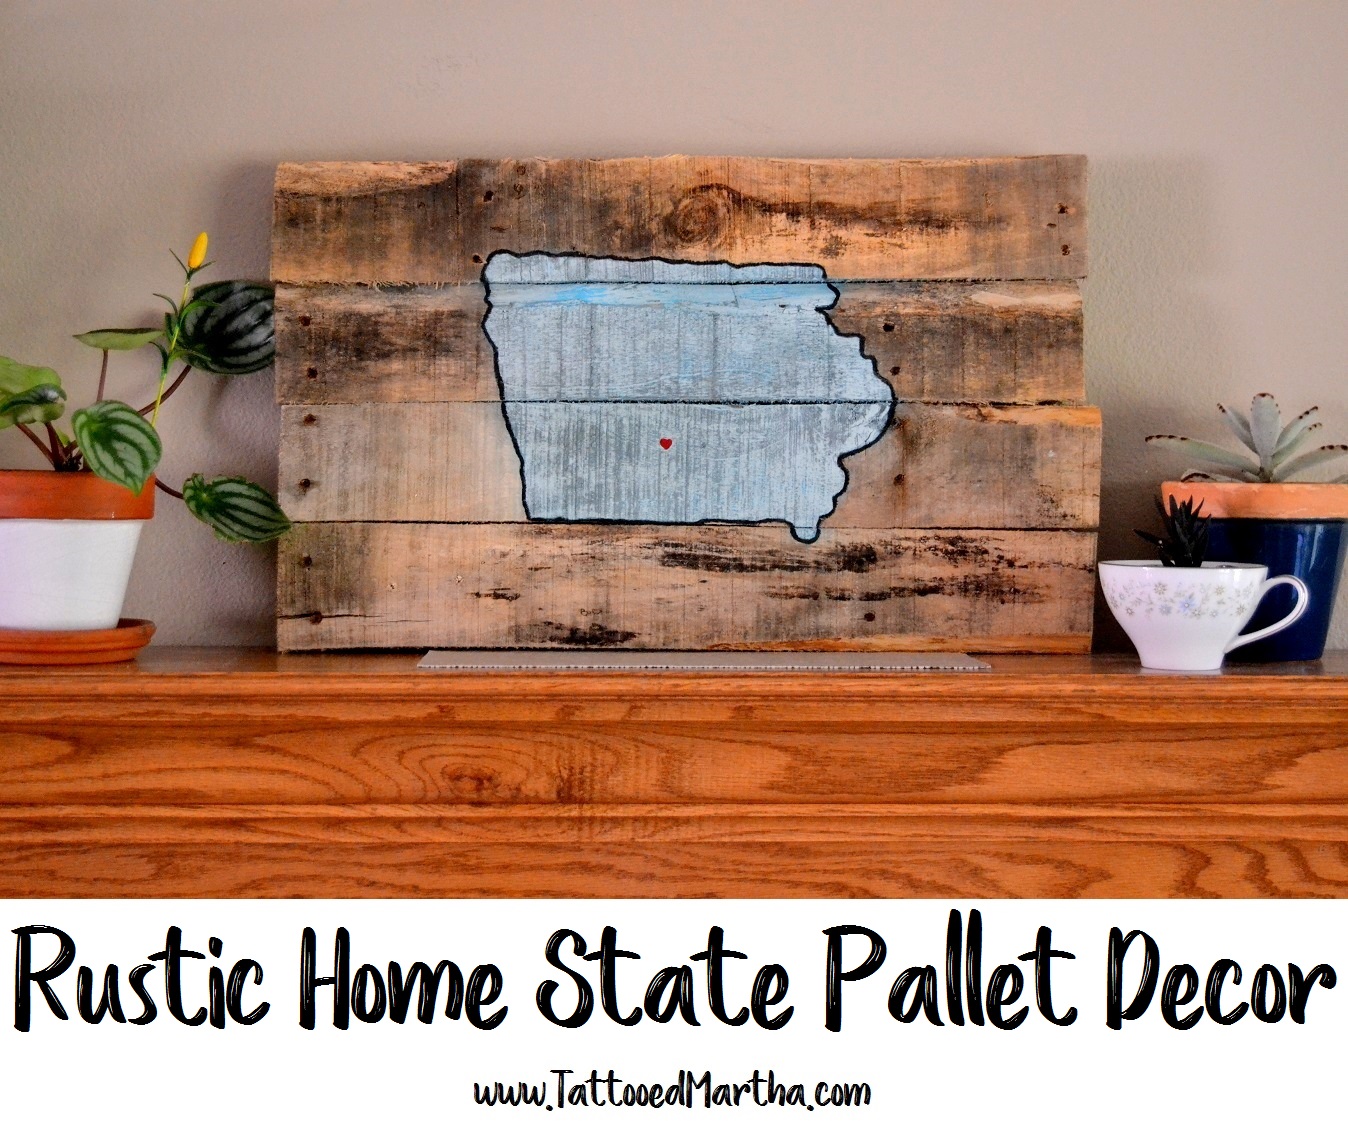 Rustic Home State Pallet Decor